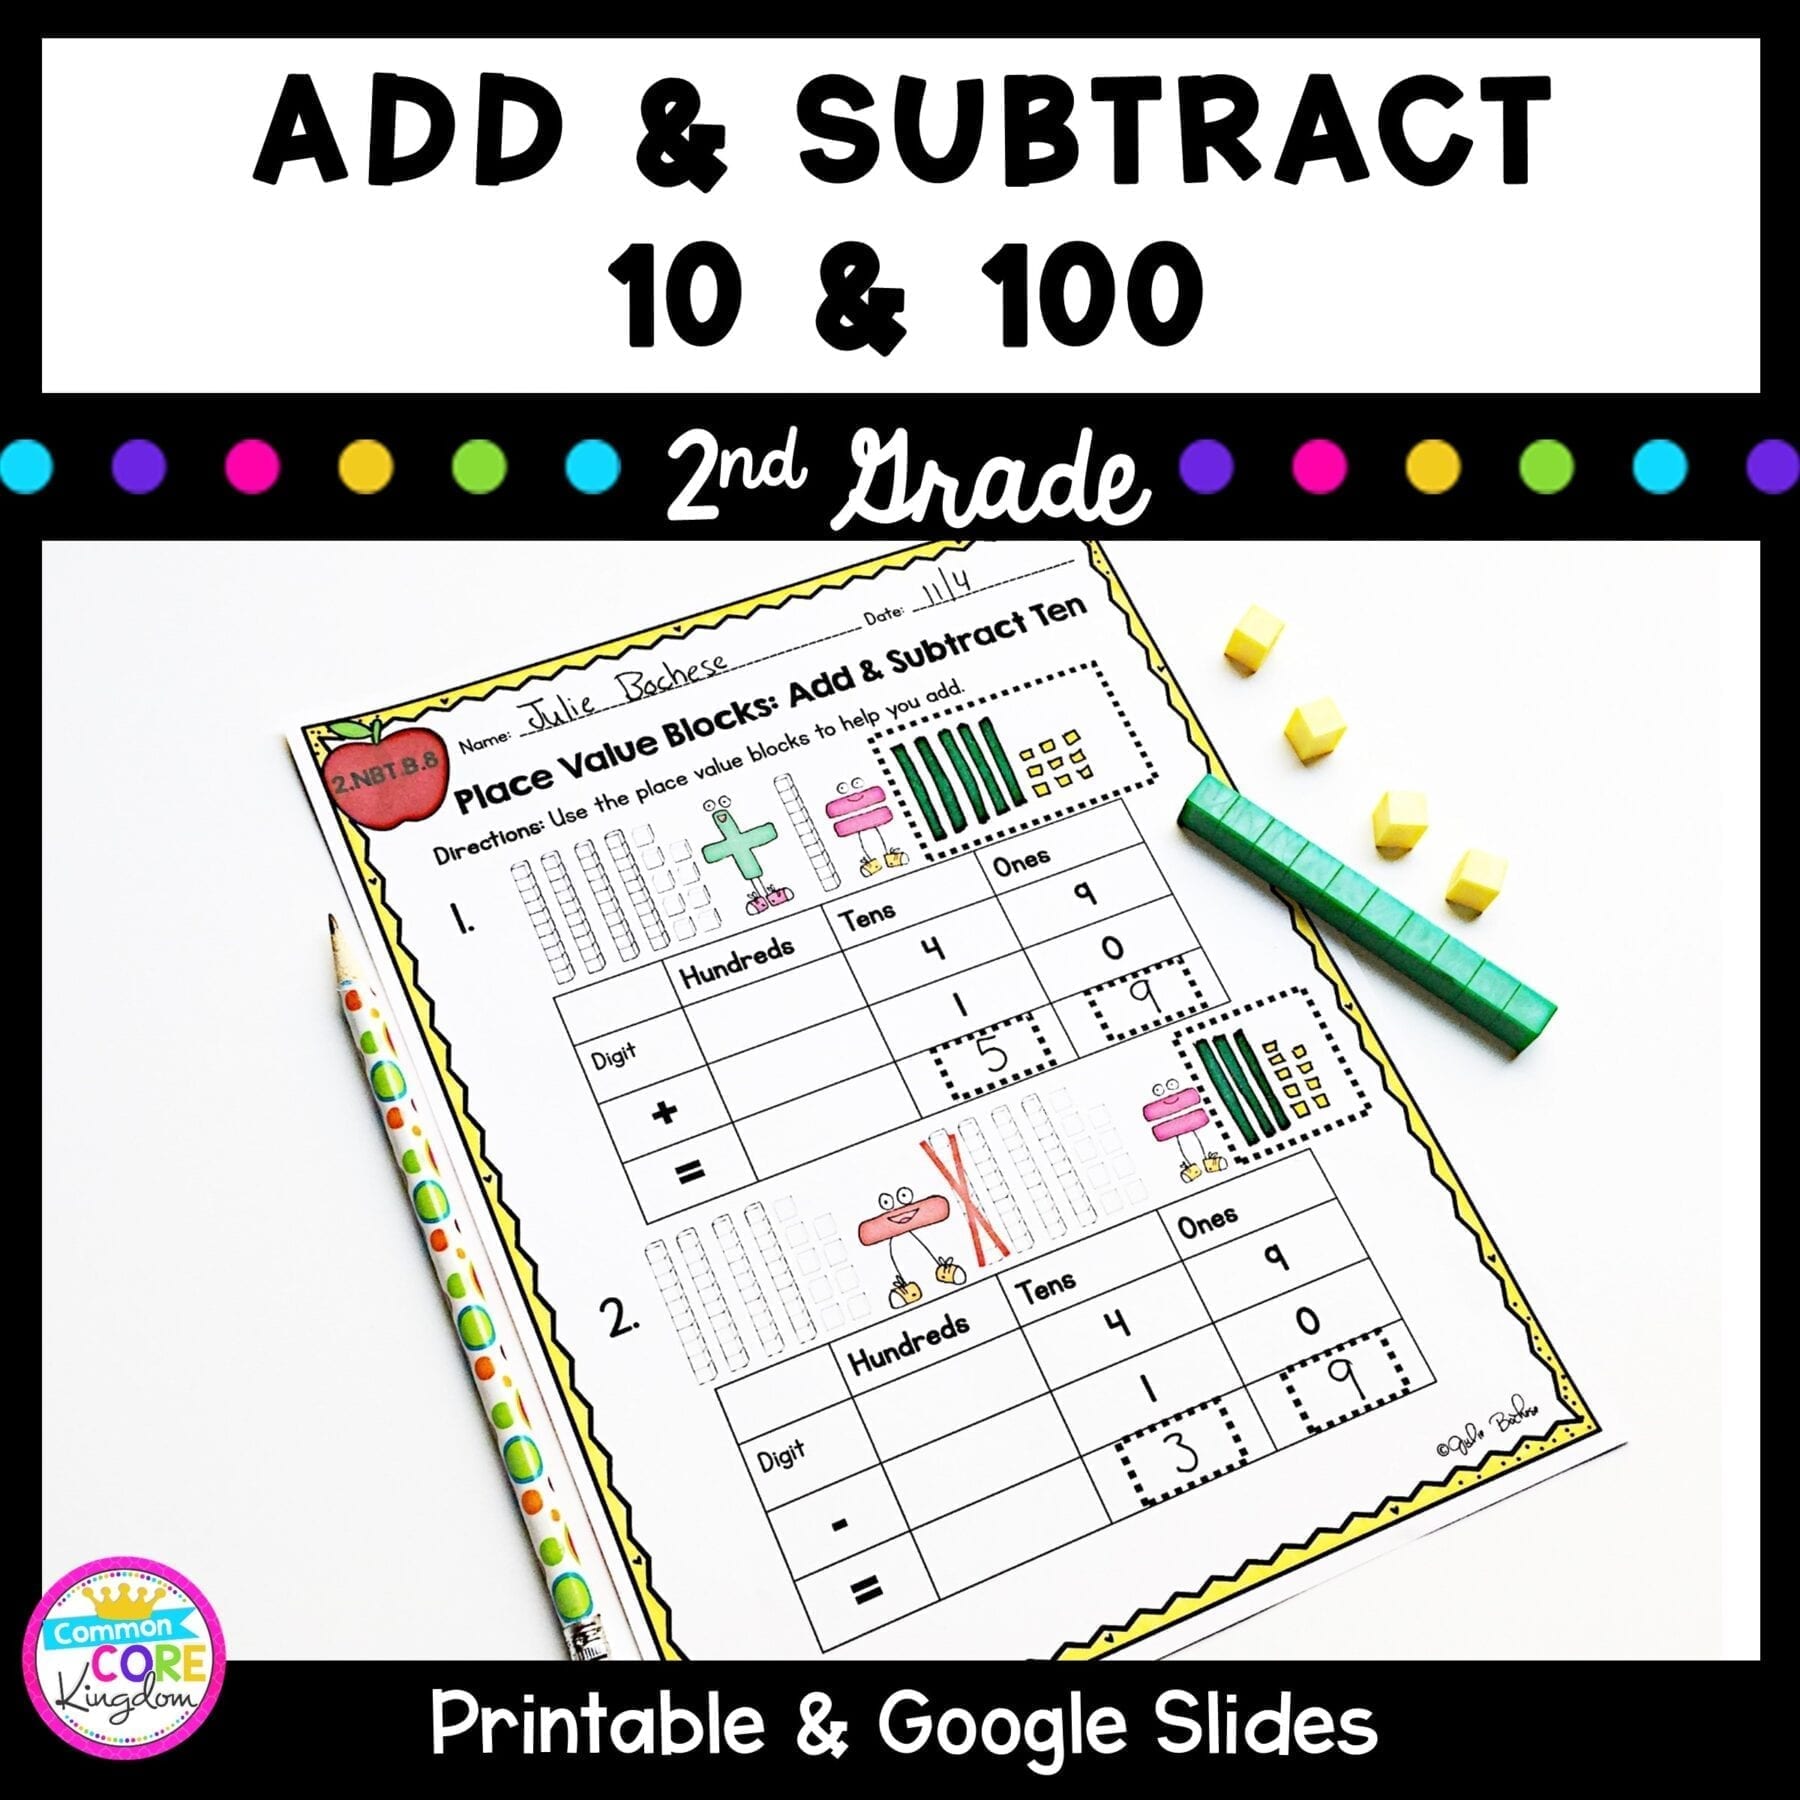 Cover for addition and subtraction resource showing 2nd grade math worksheets